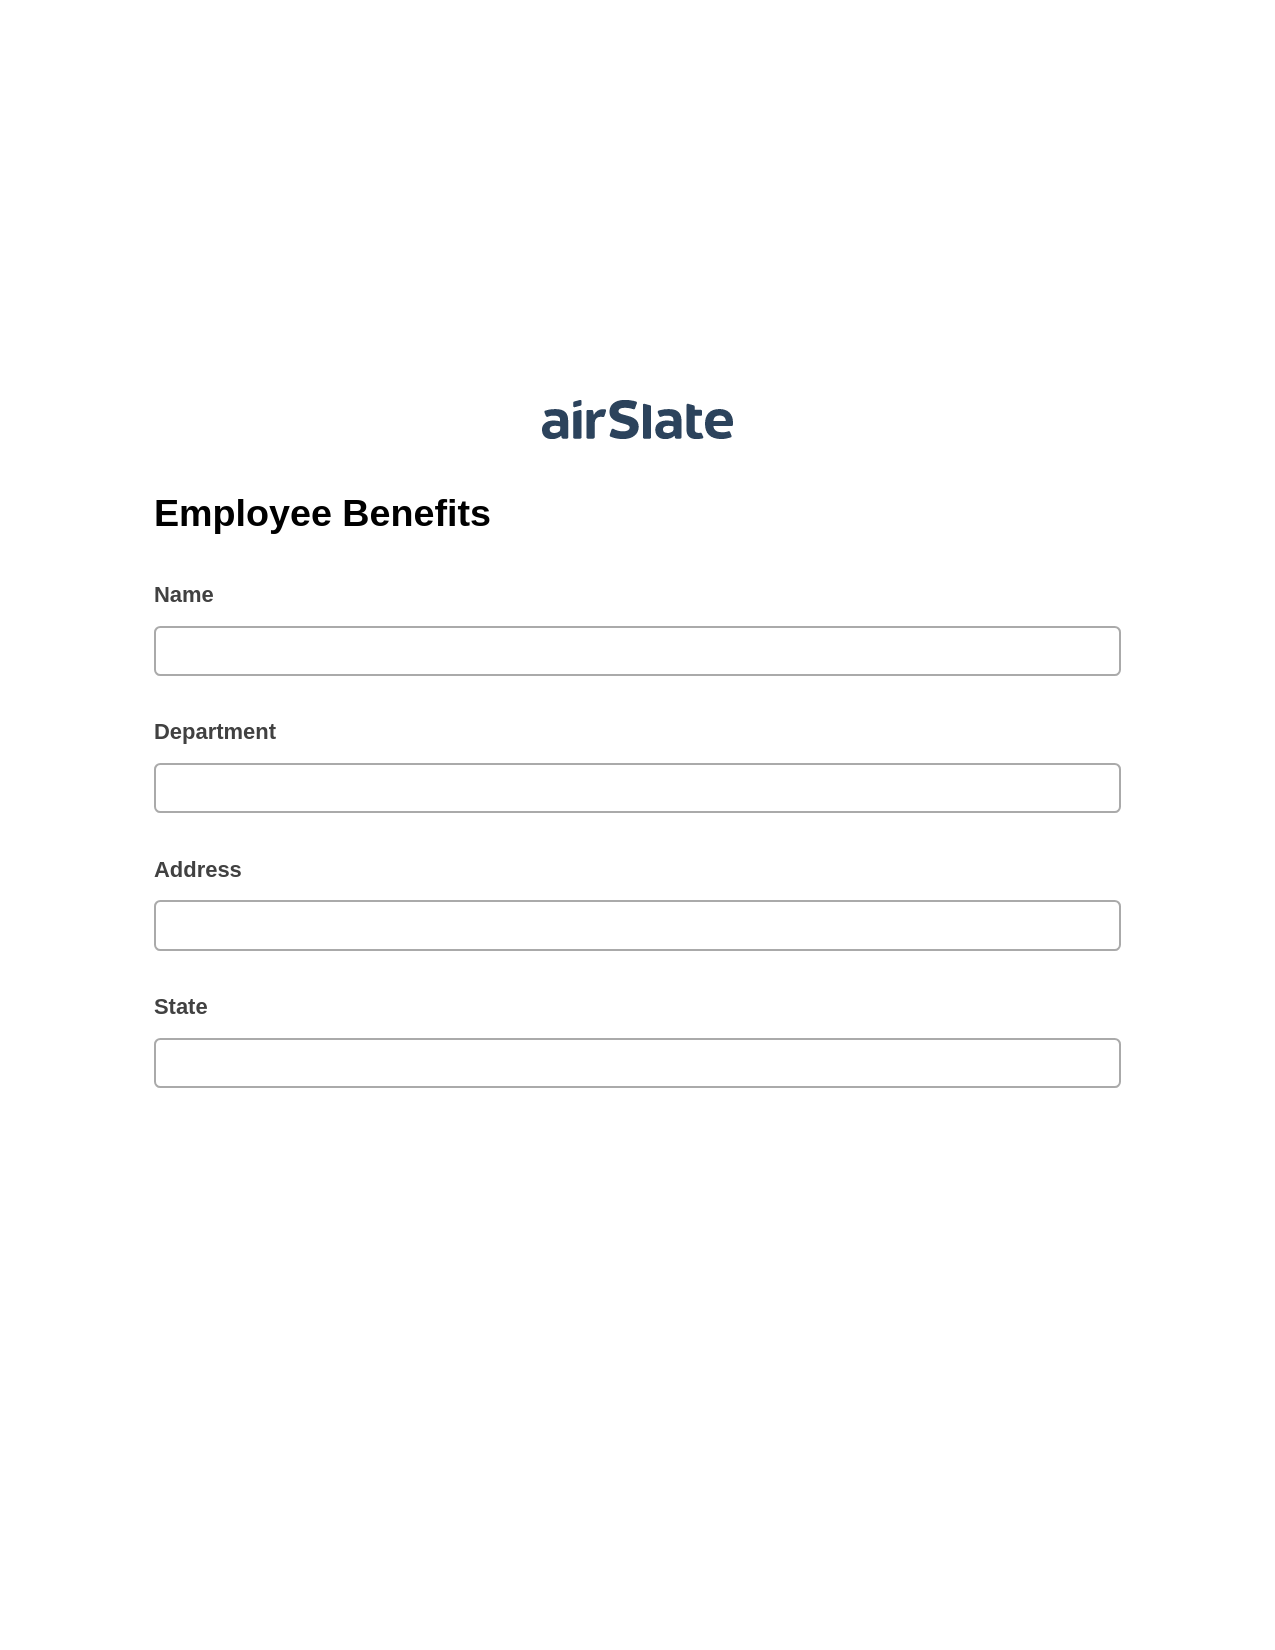 Employee Benefits Pre-fill Dropdowns from CSV File Bot, Export to MS Dynamics 365 Bot, Export to Formstack Documents Bot